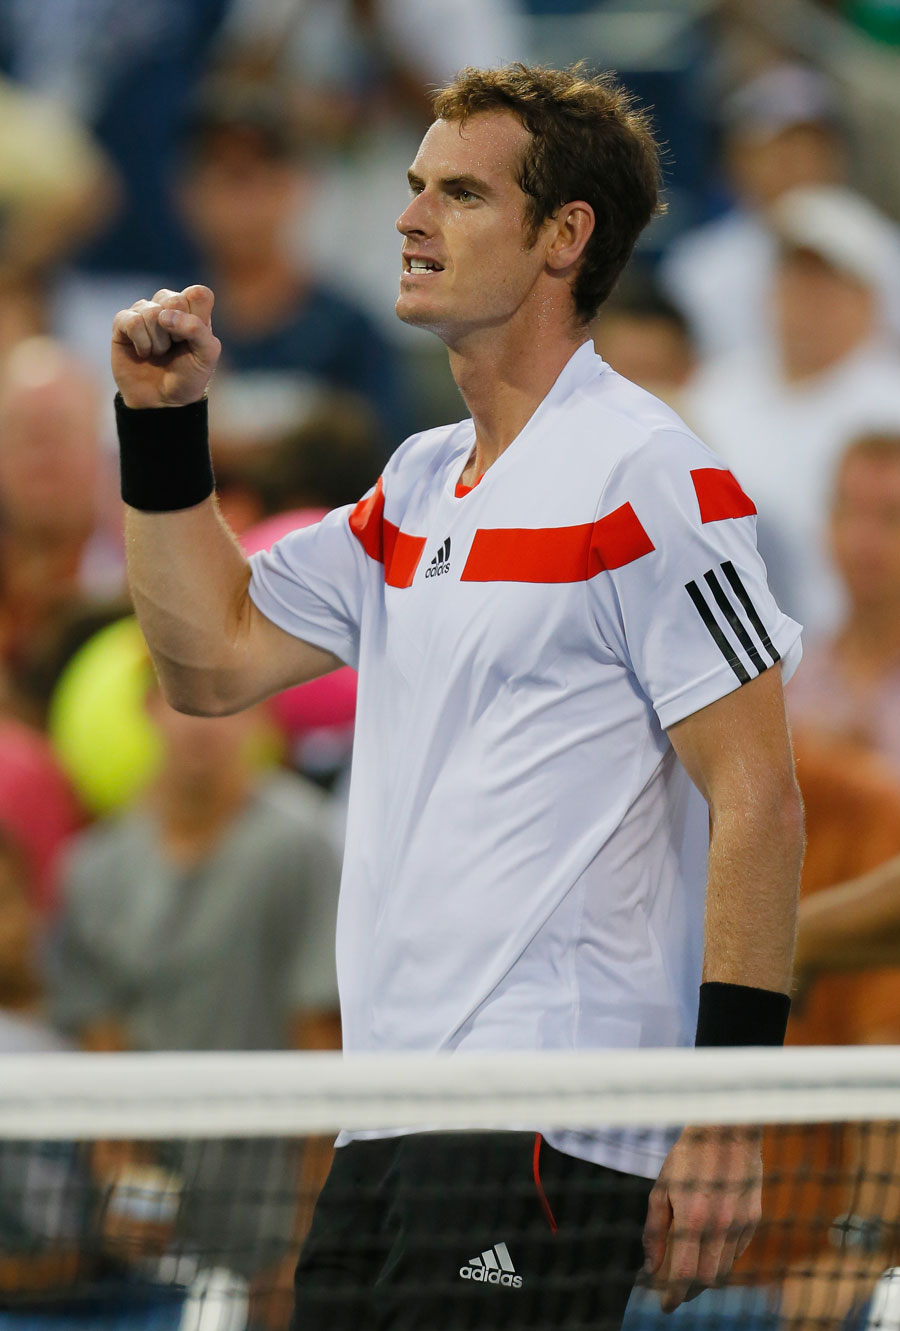 Andy Murray celebrates his victory over Leonard Mayer